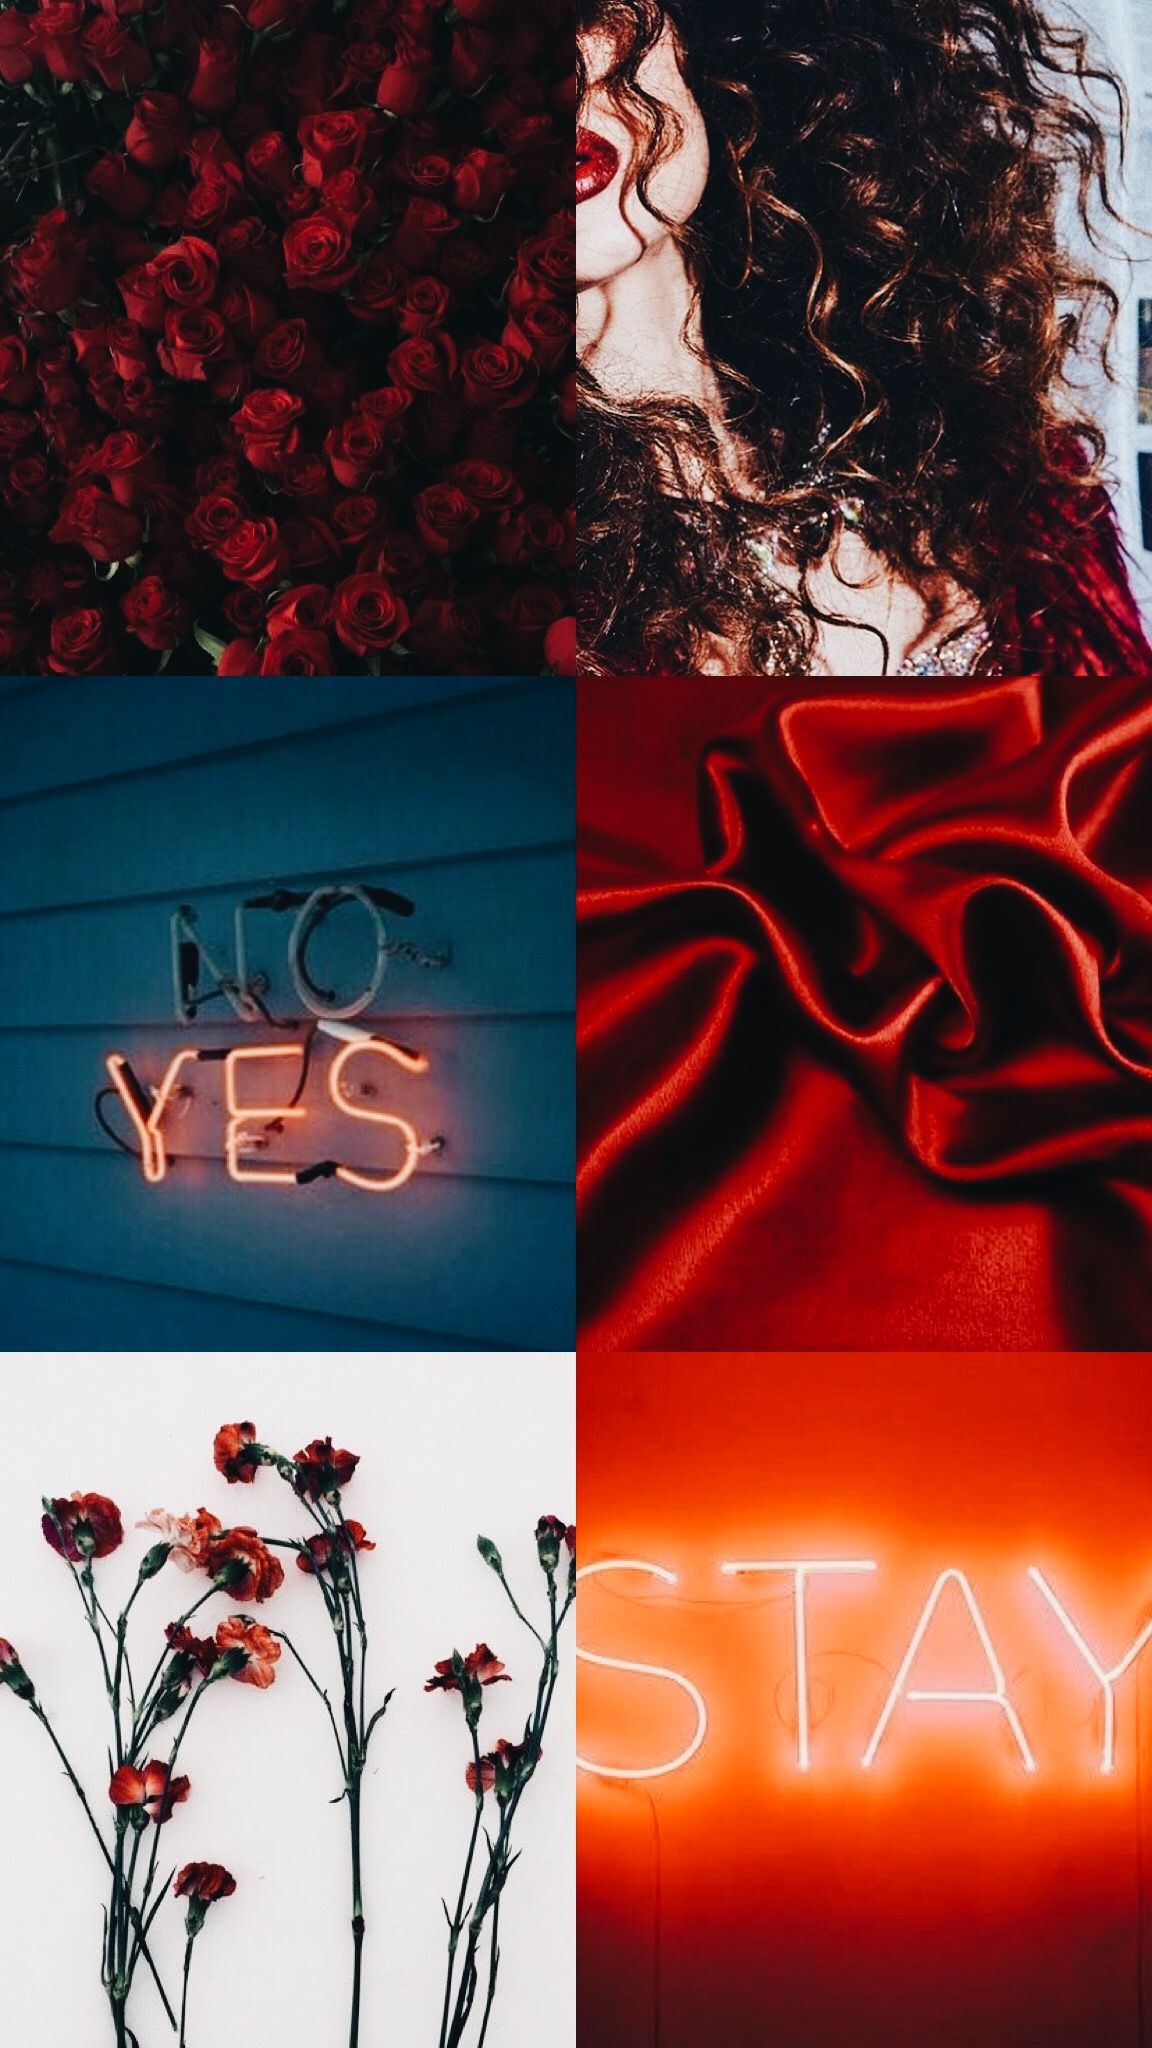 Aesthetic collage of red roses, a woman with curly hair, a red neon sign that says 